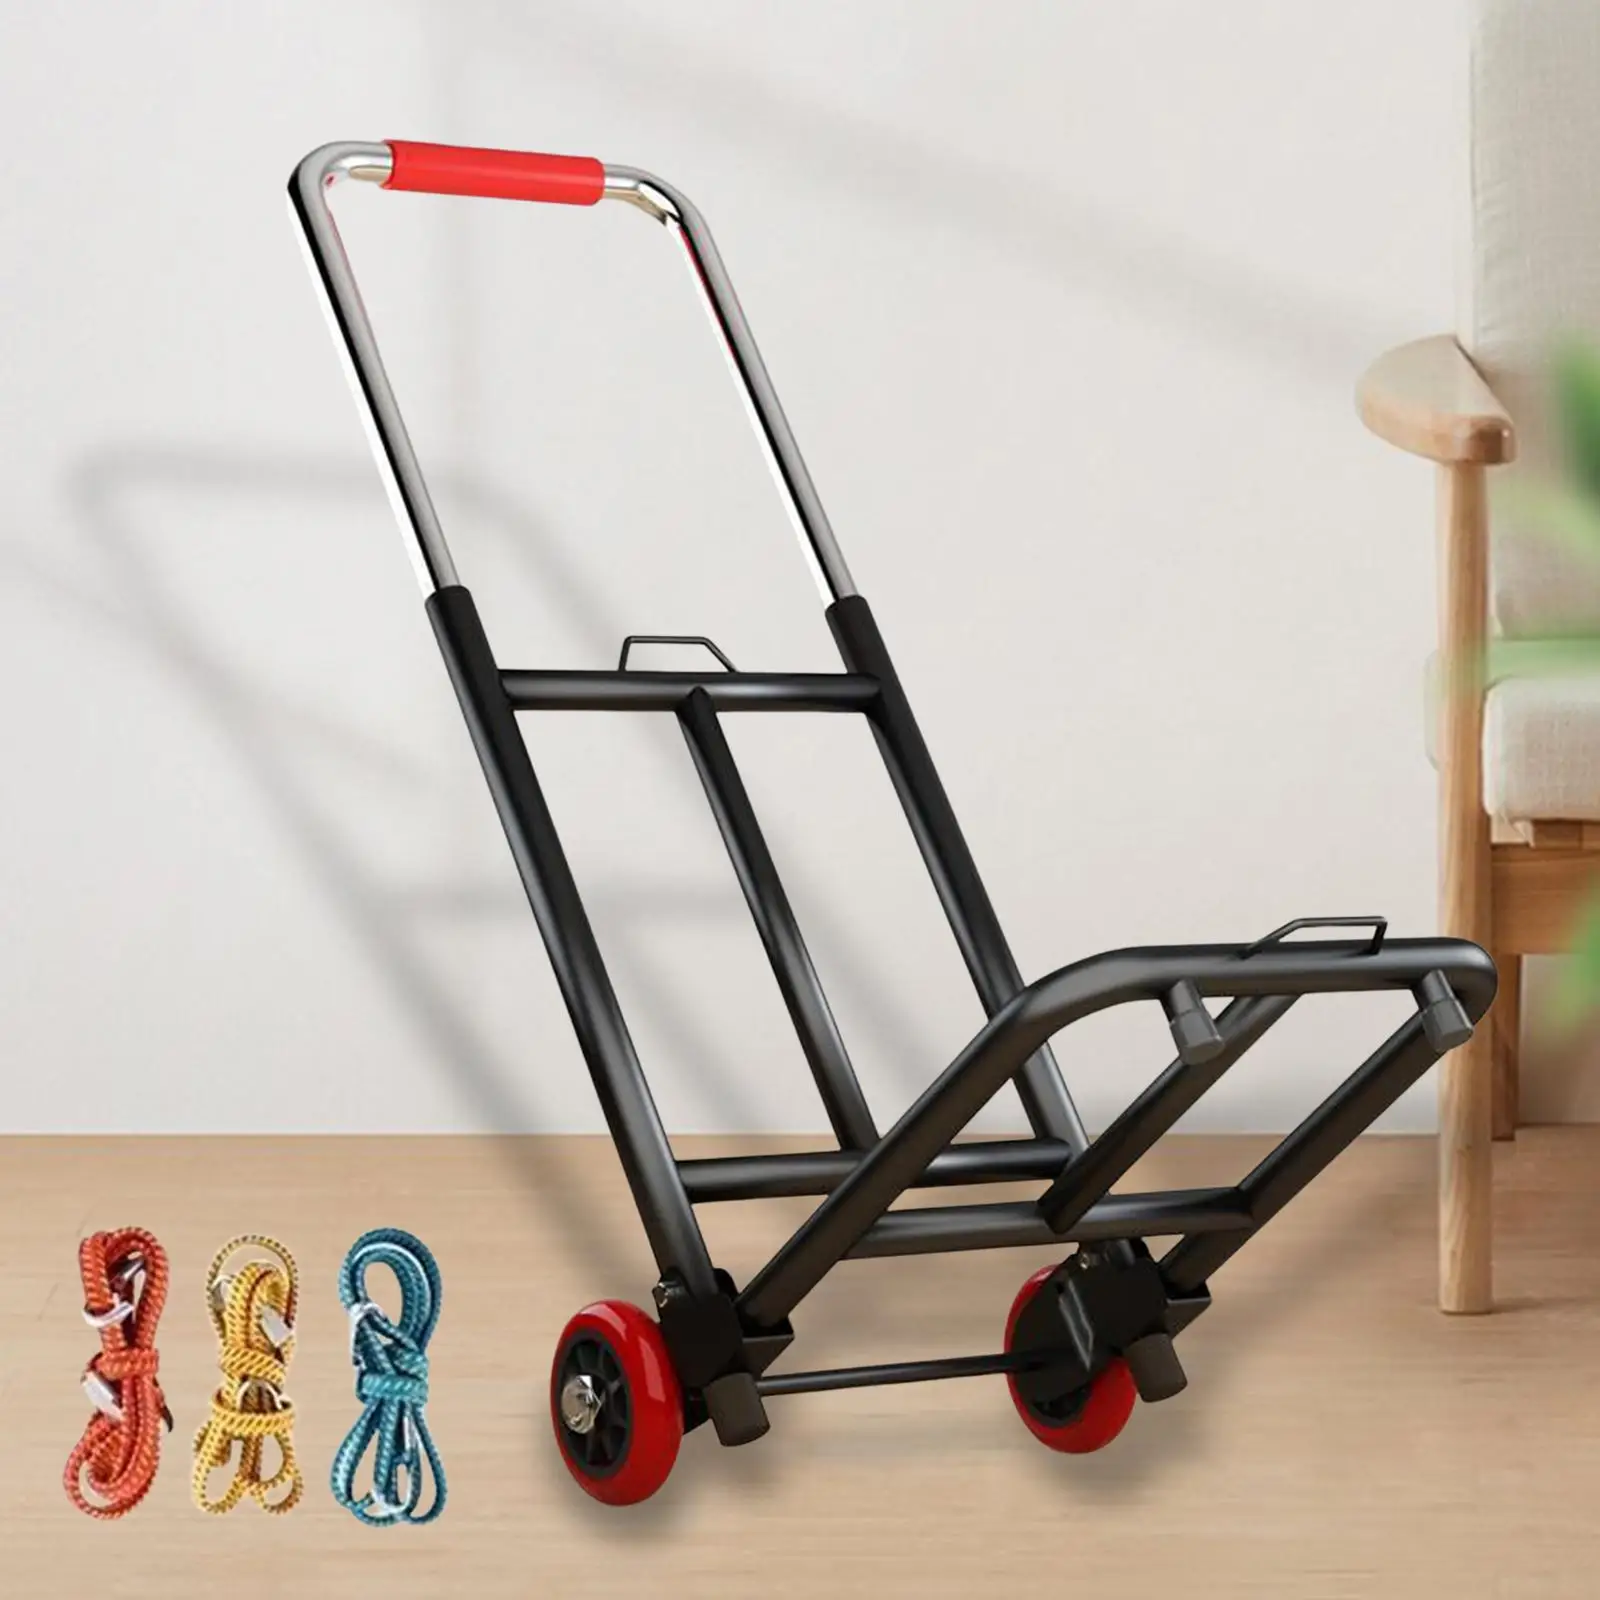 Foldable Hand Truck Dolly Adjustable Handle Trolley Cart Sturdy with 3 Elastic Ropes for Home Moving and Travel Luggage Handcart